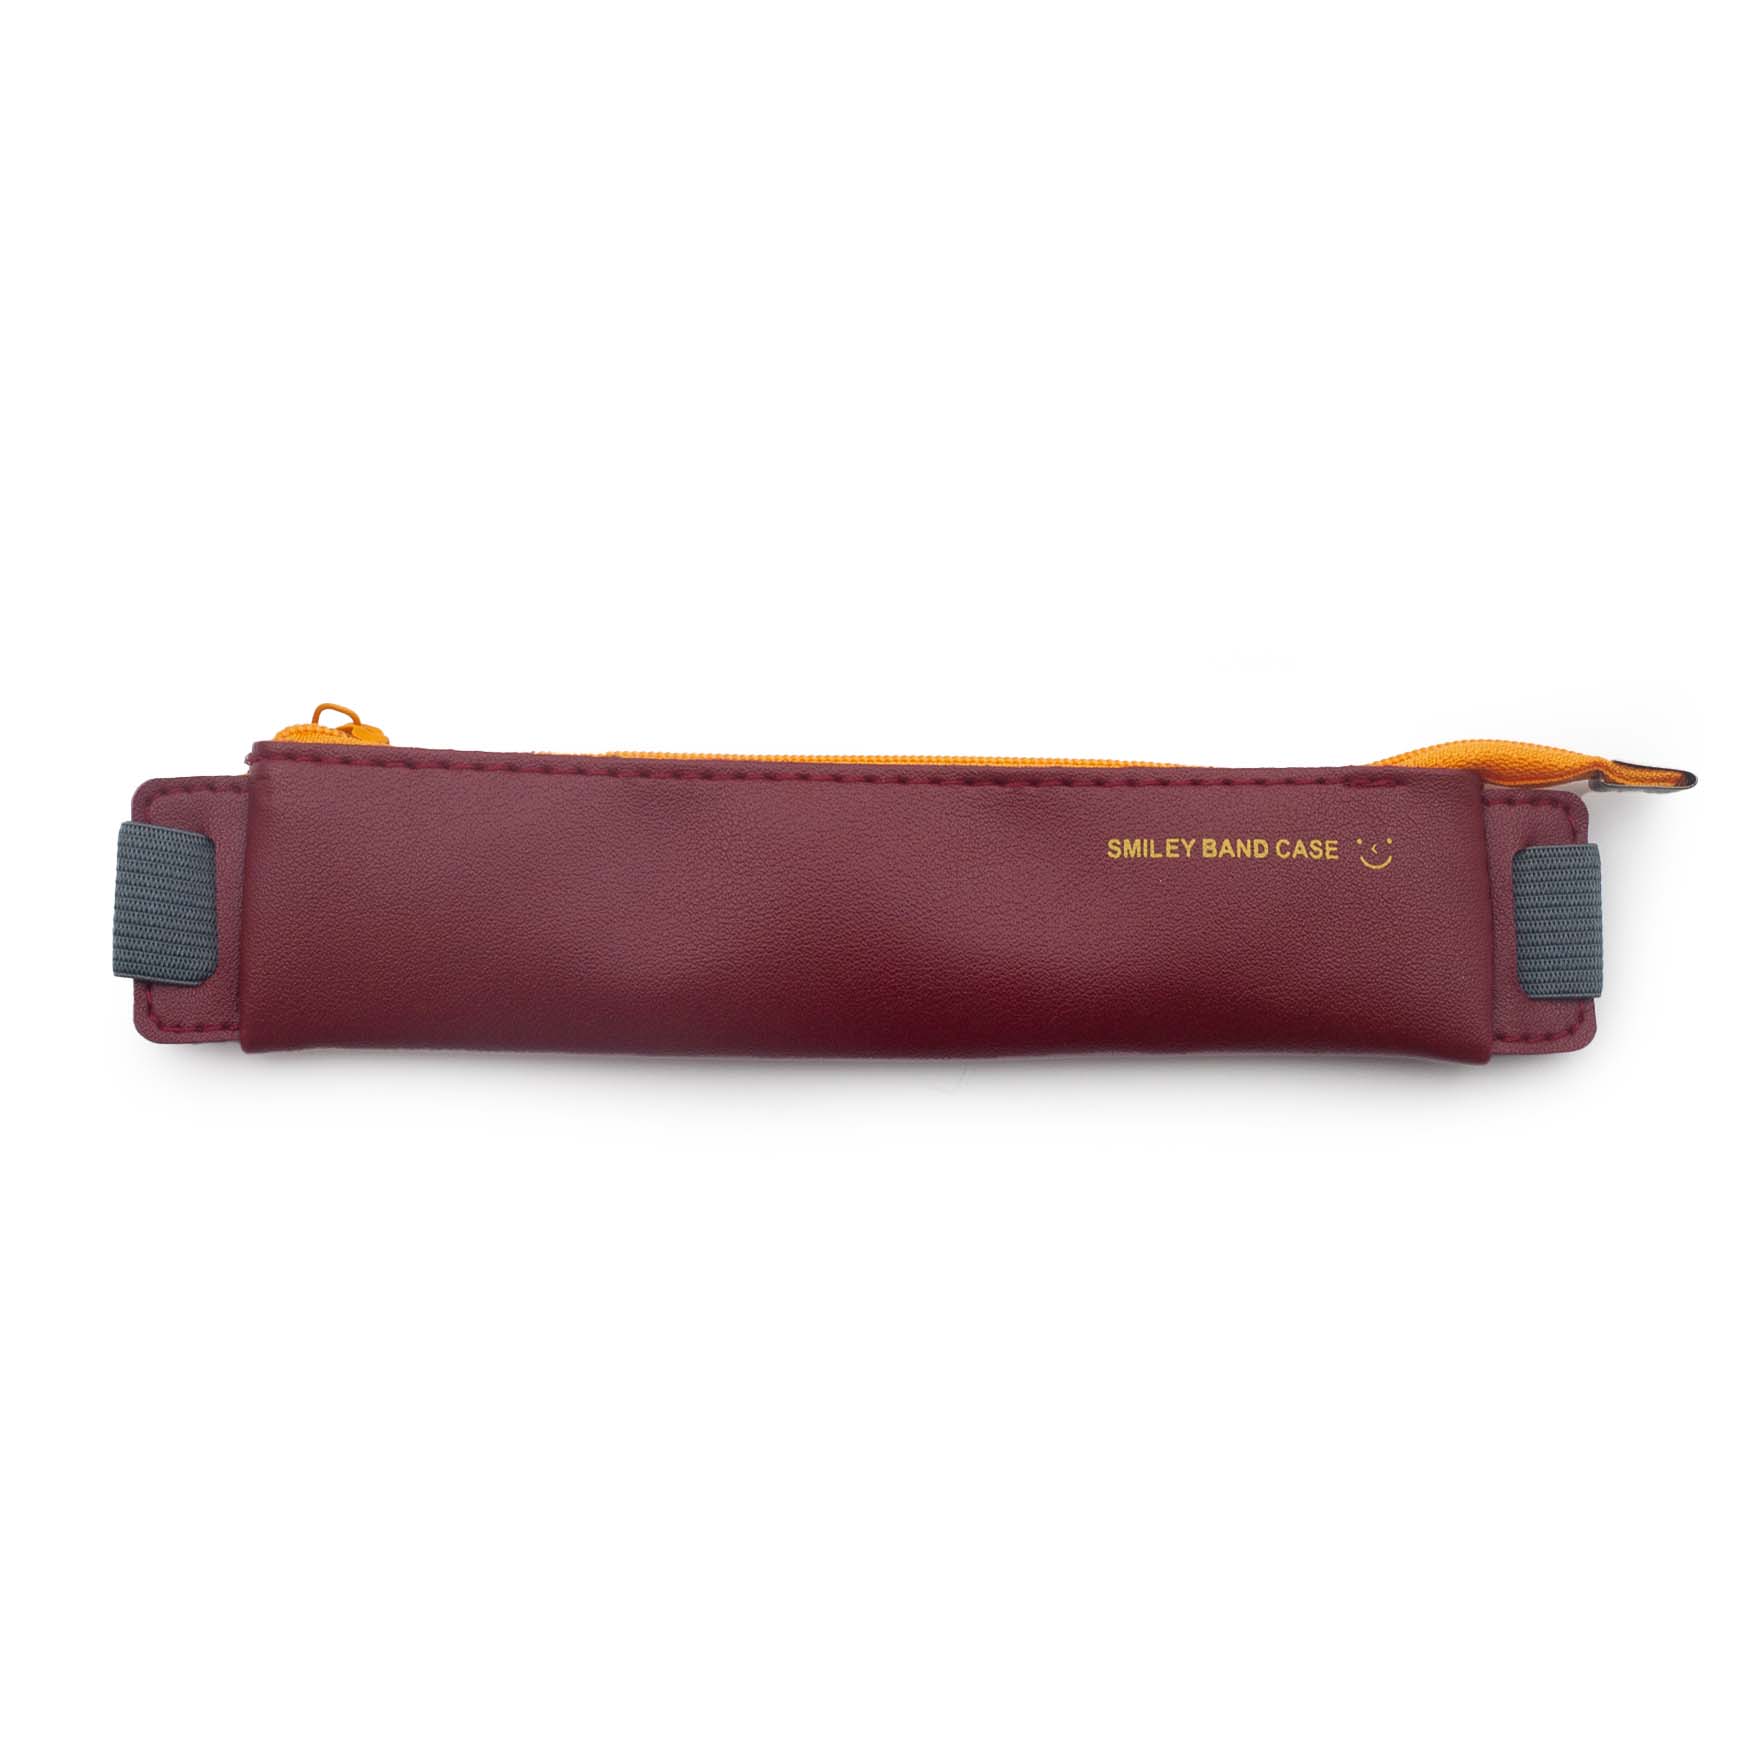 Image shows a maroon diary/pencil pouch